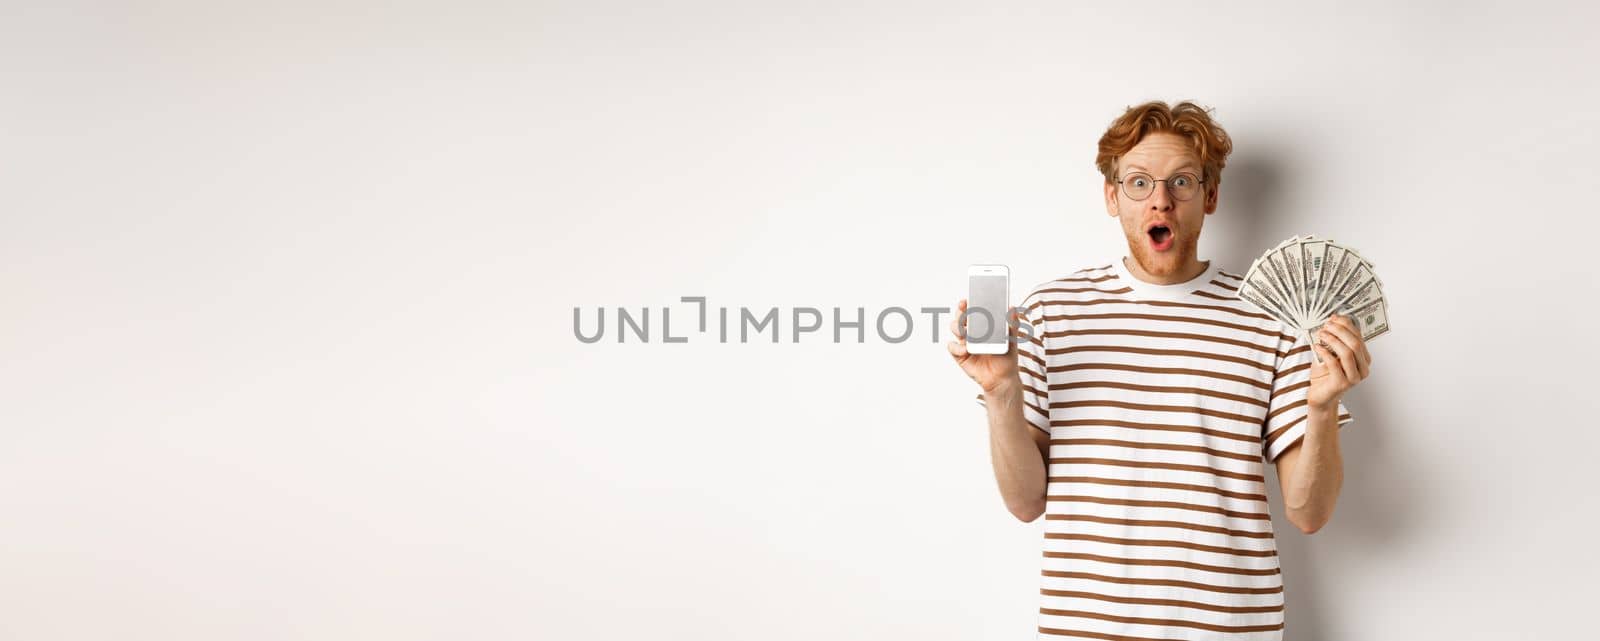 Amazed redhead man showing smartphone app on blank screen and money, winning prize cash online, standing over white background.